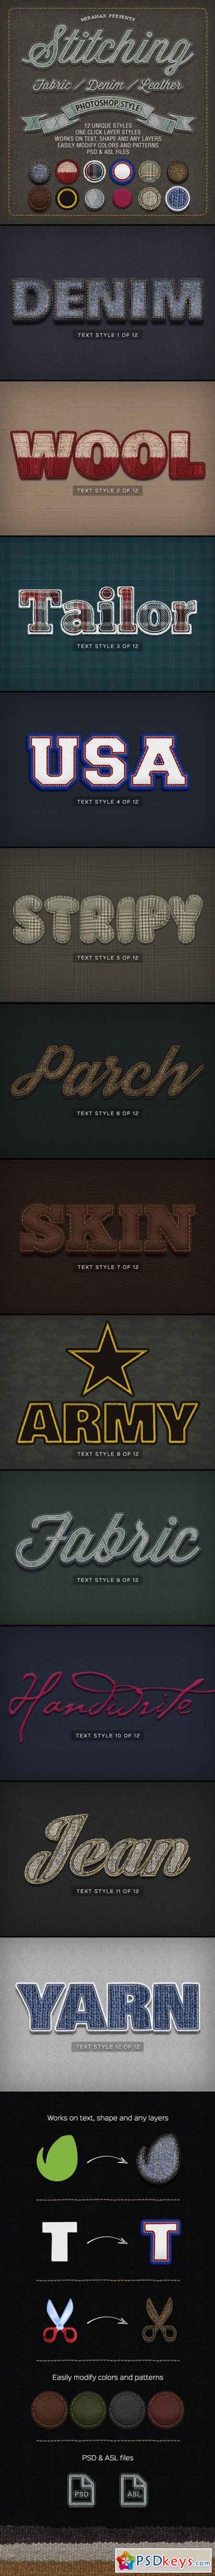 Stitching Fabric - Denim - Leather Text Effects 8230591